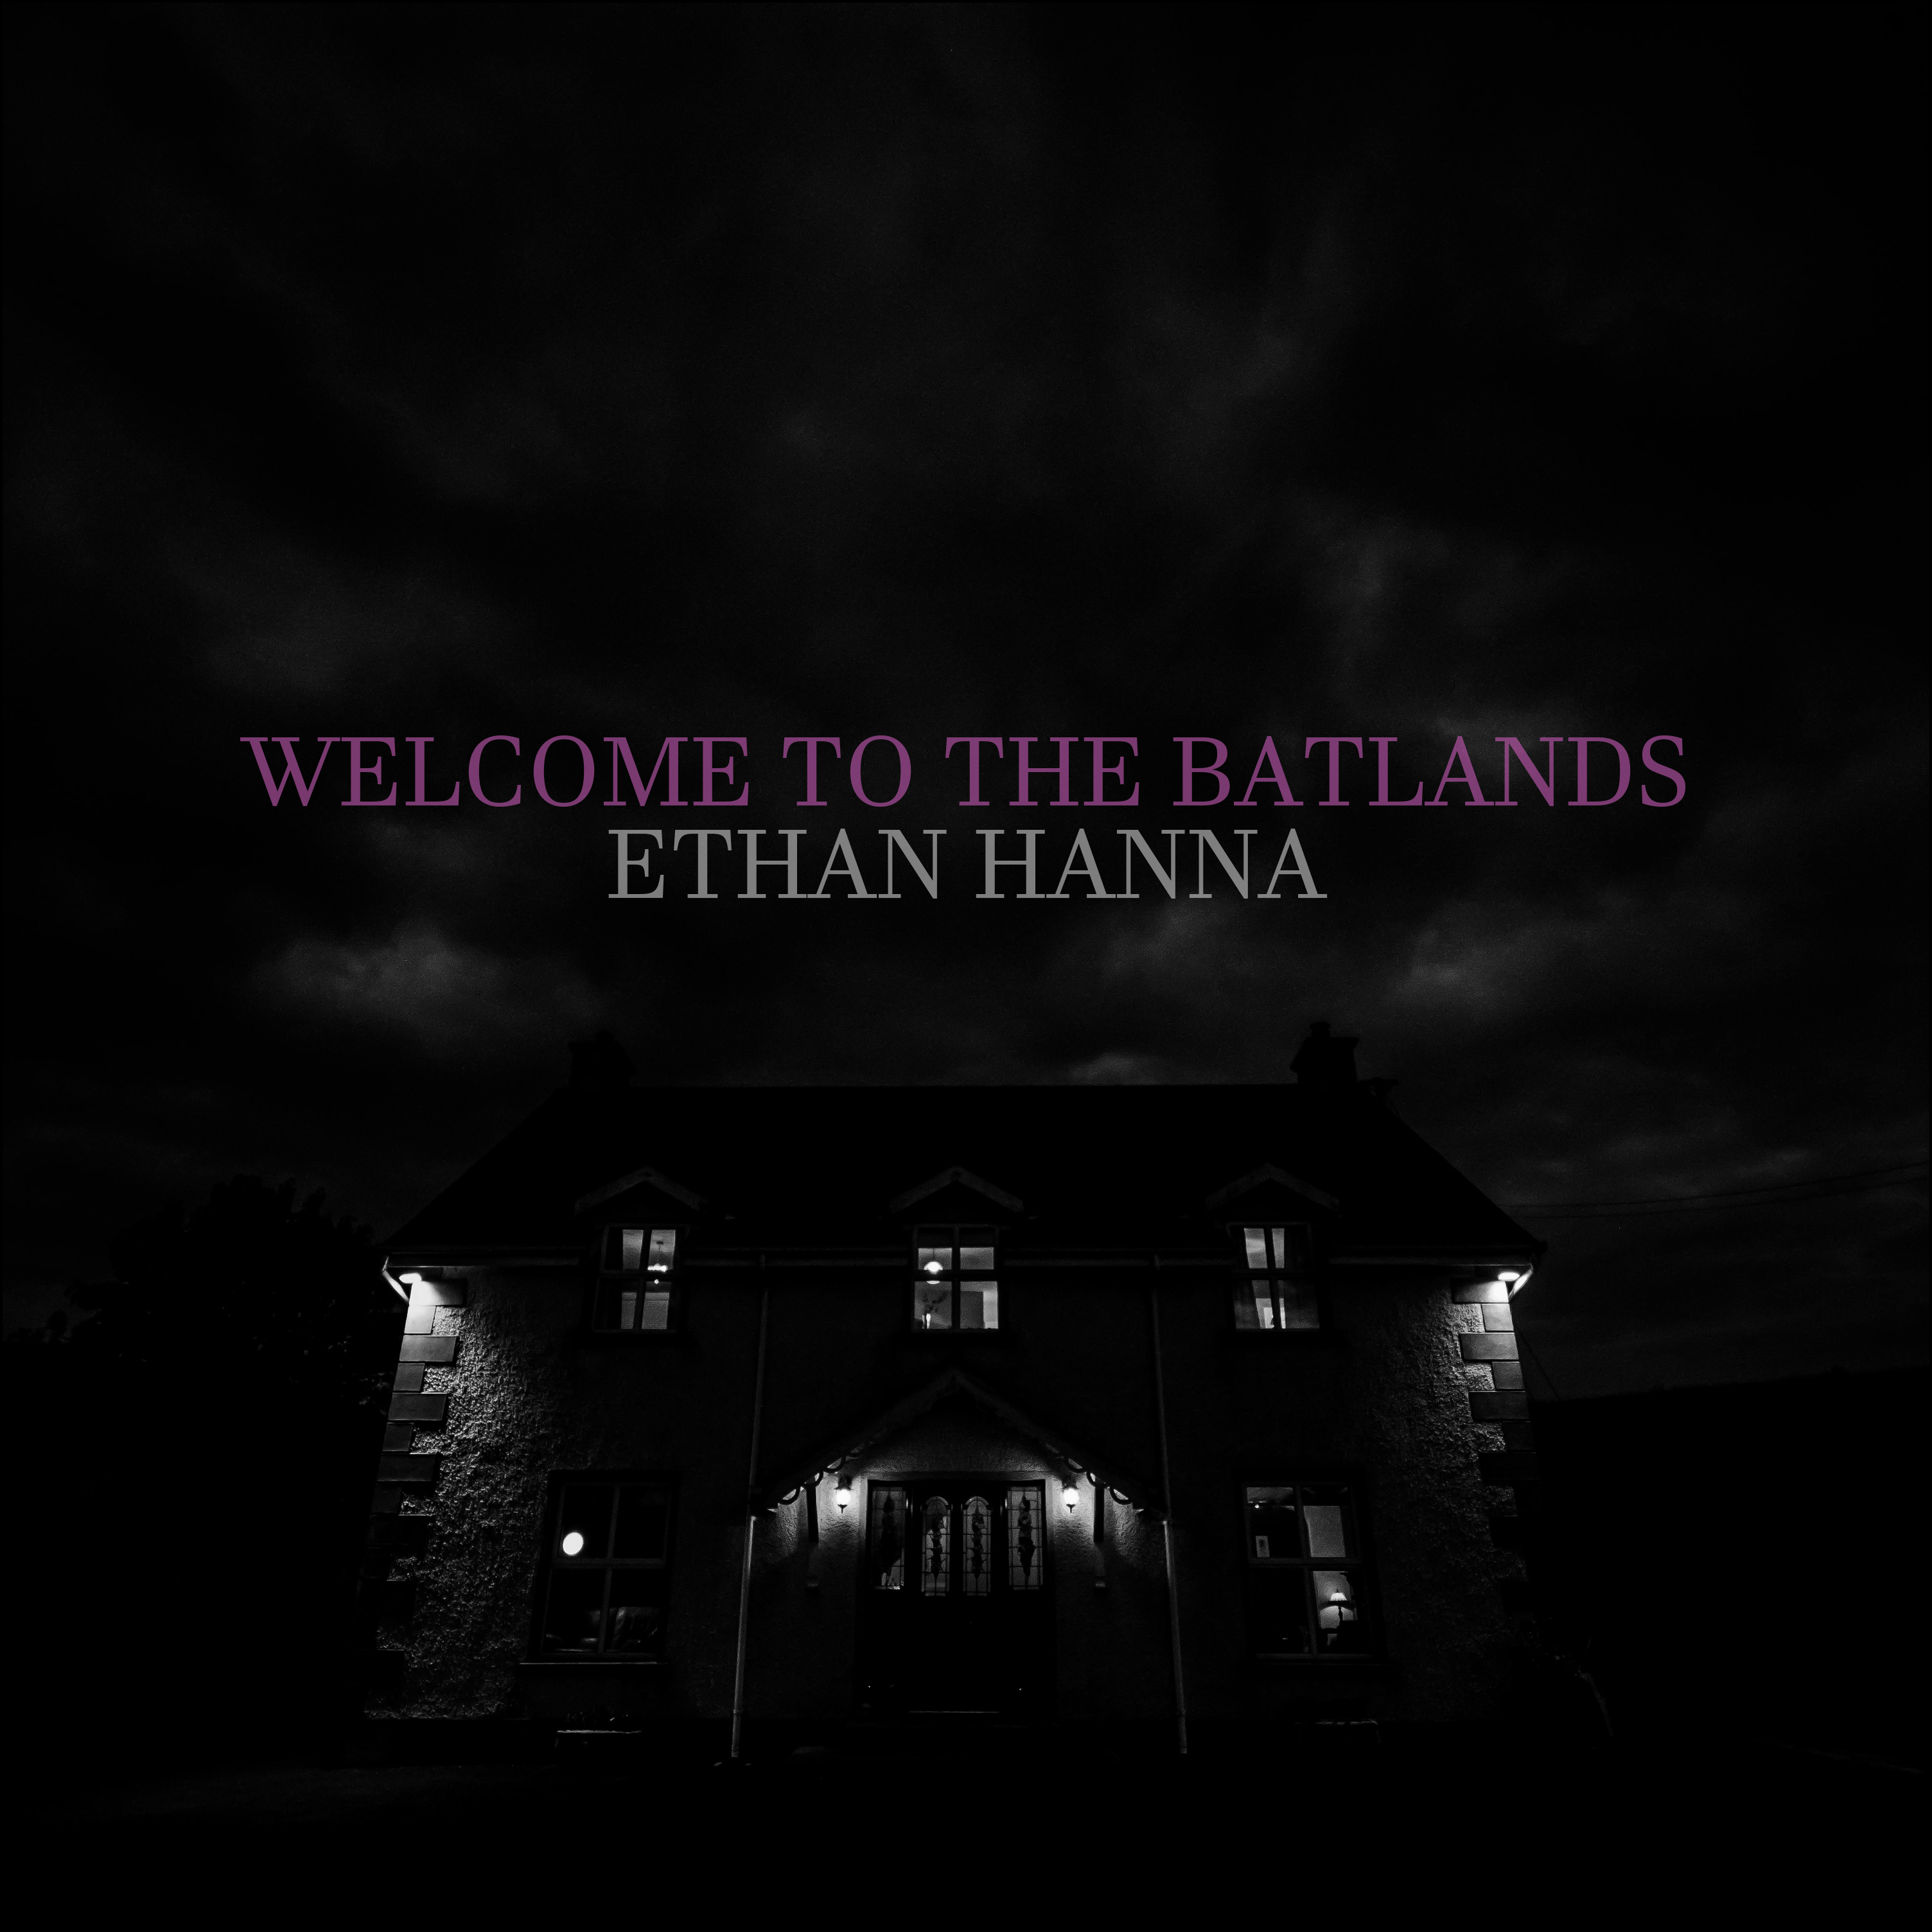 REVIEW: Welcome to the Batlands by Ethan Hanna